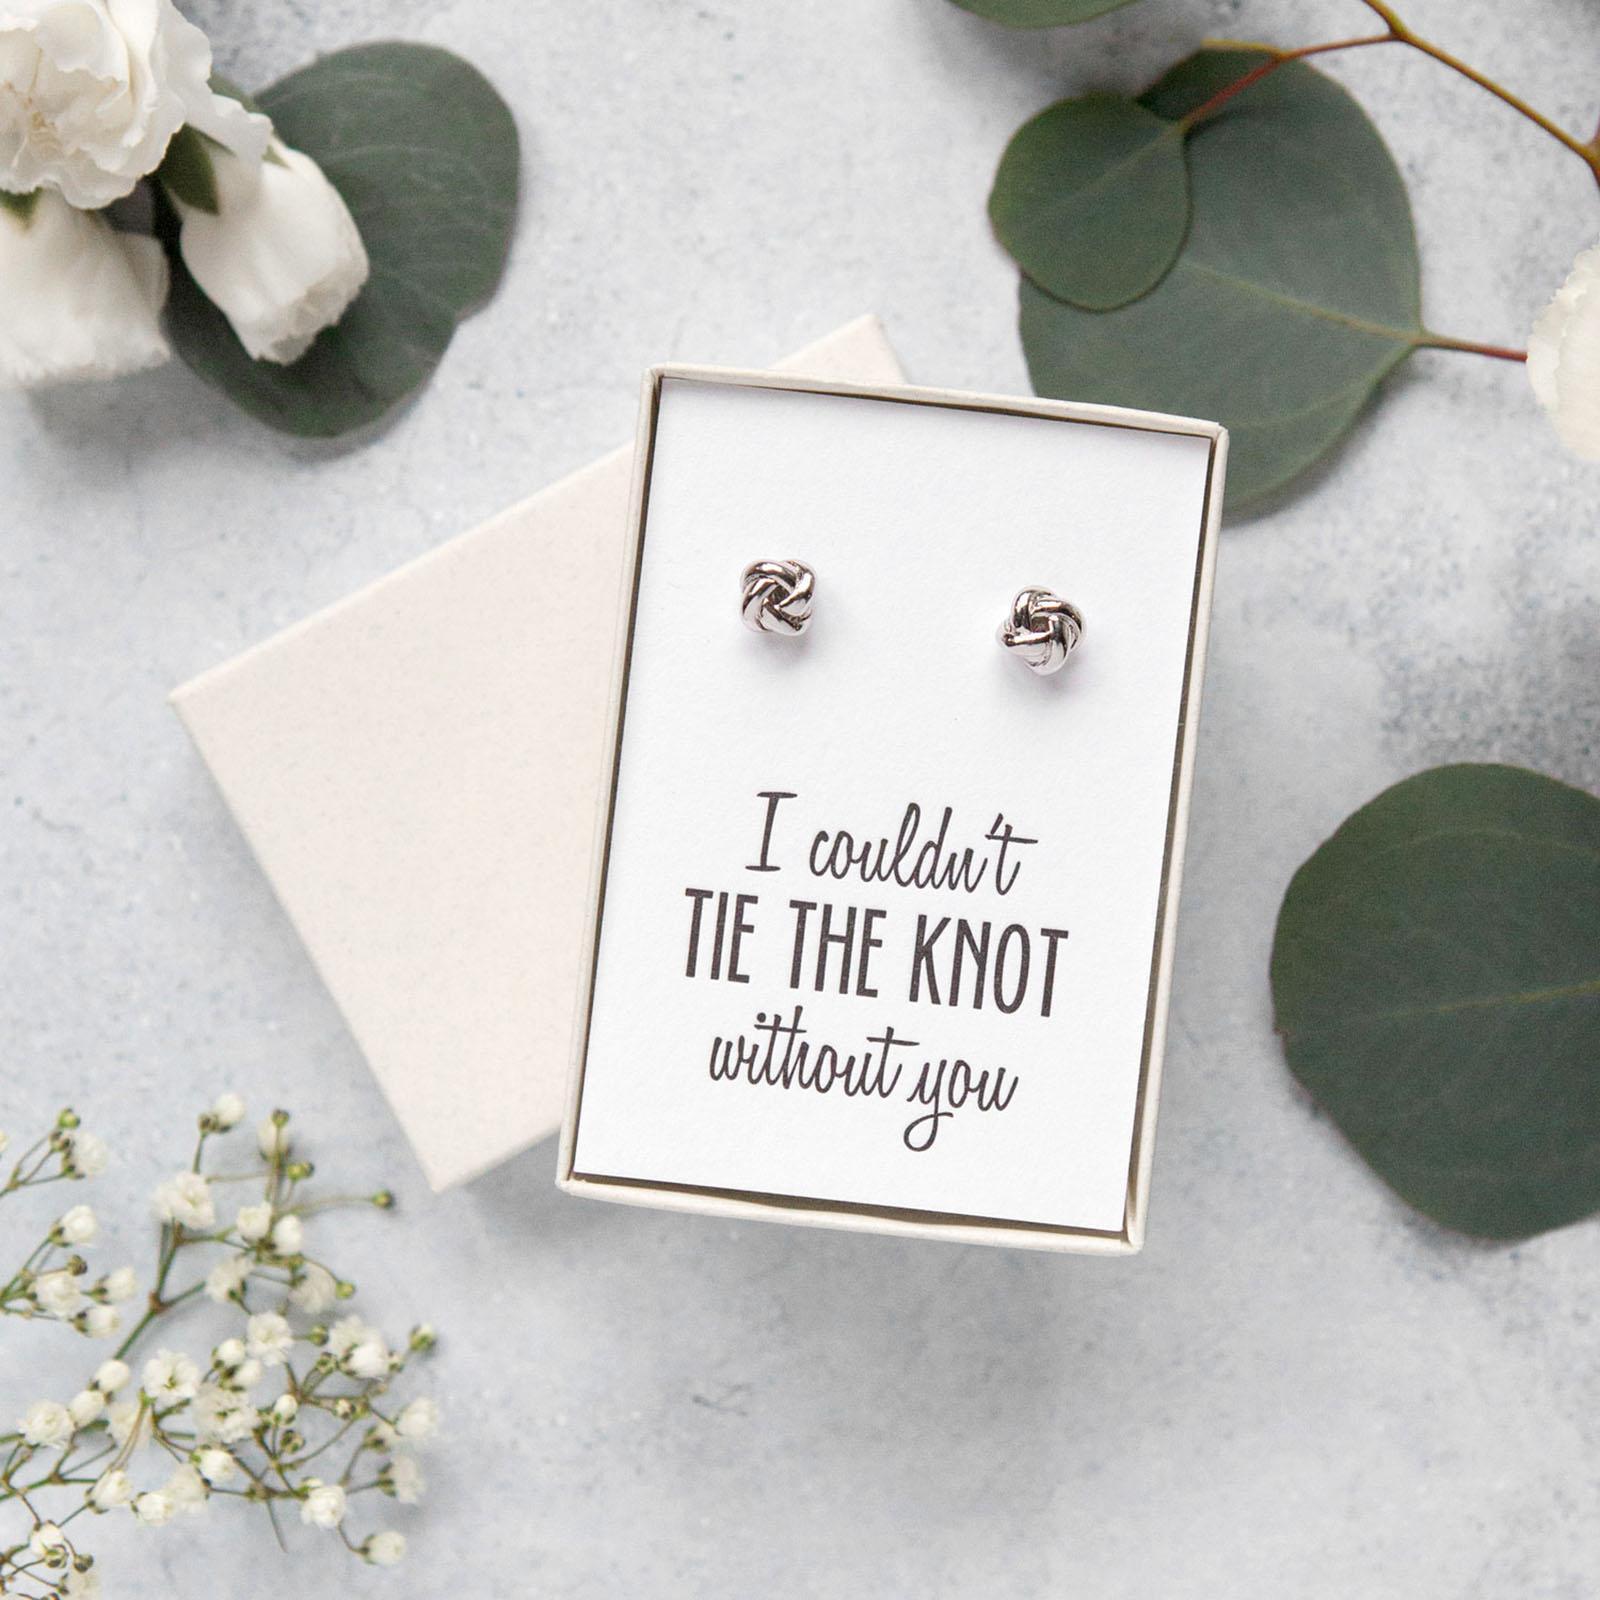 Maid of Honour Gift Rose Gold Plated "Tie the Knot" Stud Earrings Bridesmaid 